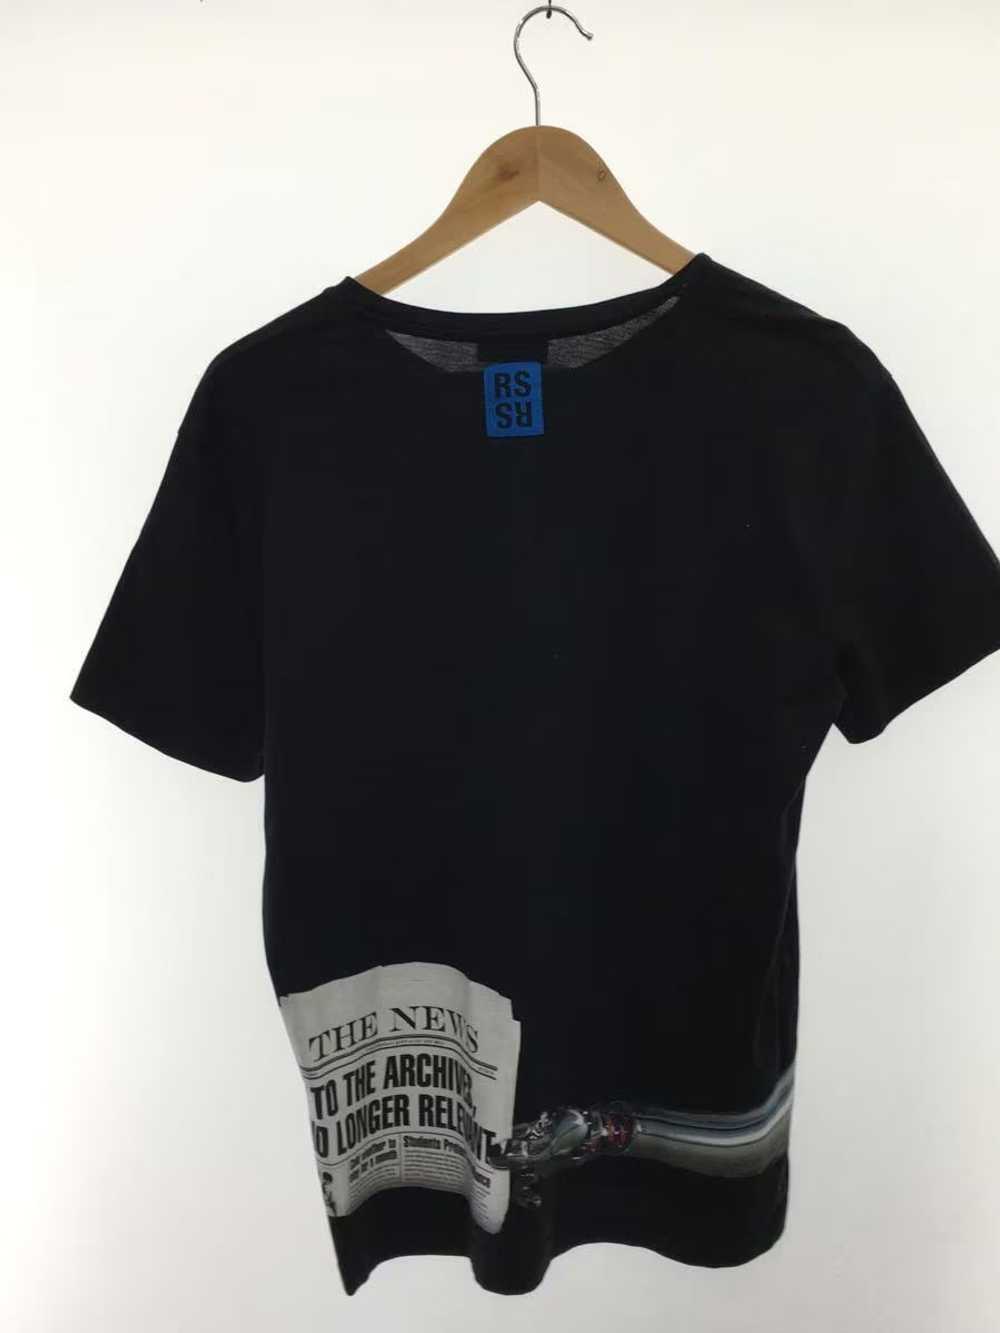 Raf Simons "TO THE ARCHIVES" Tee - image 1